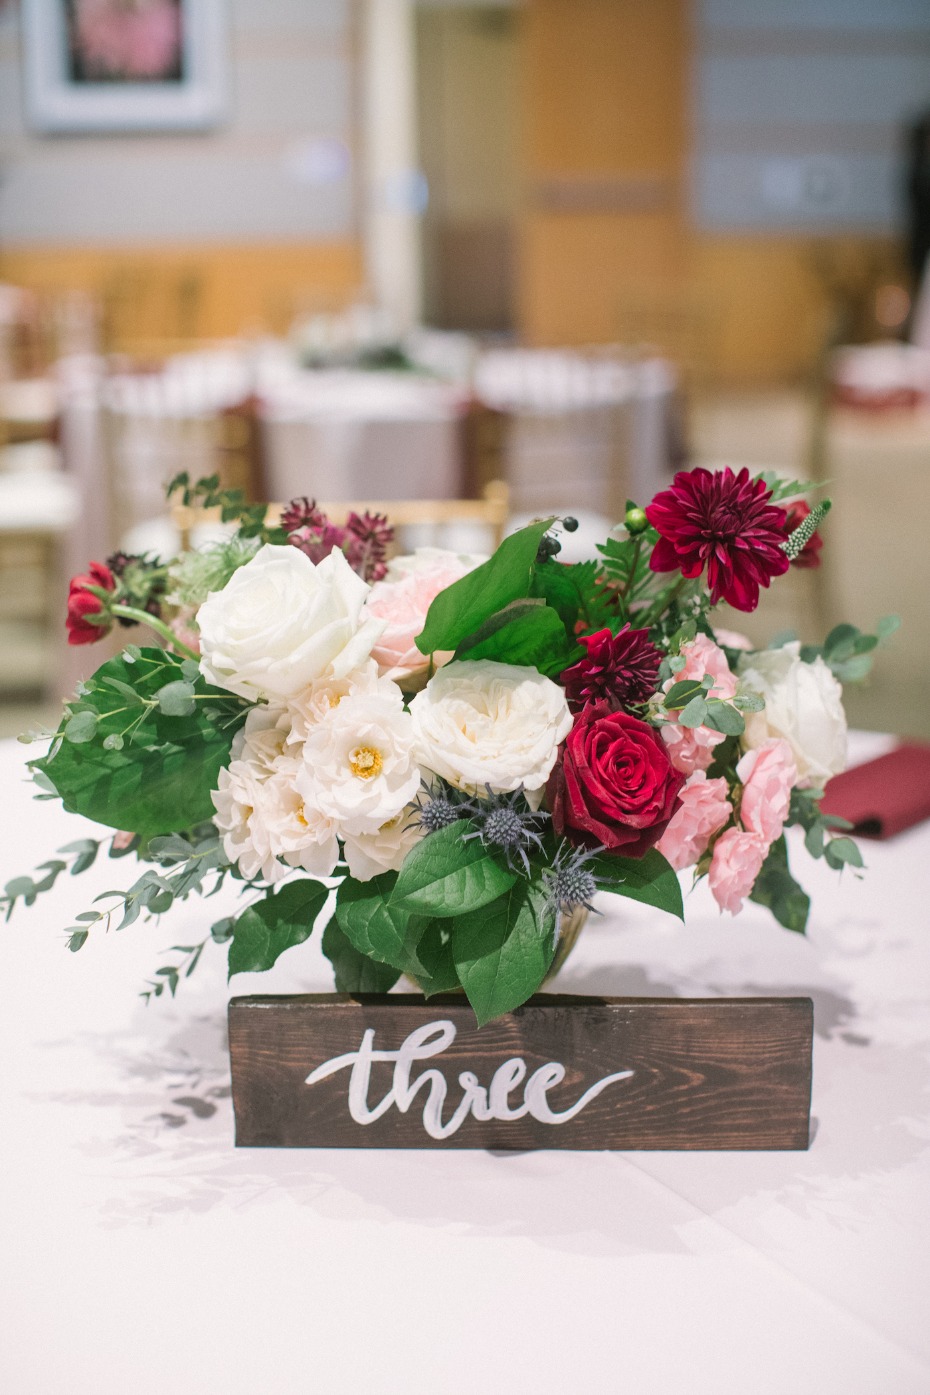 Floral centerpiece with wood table number